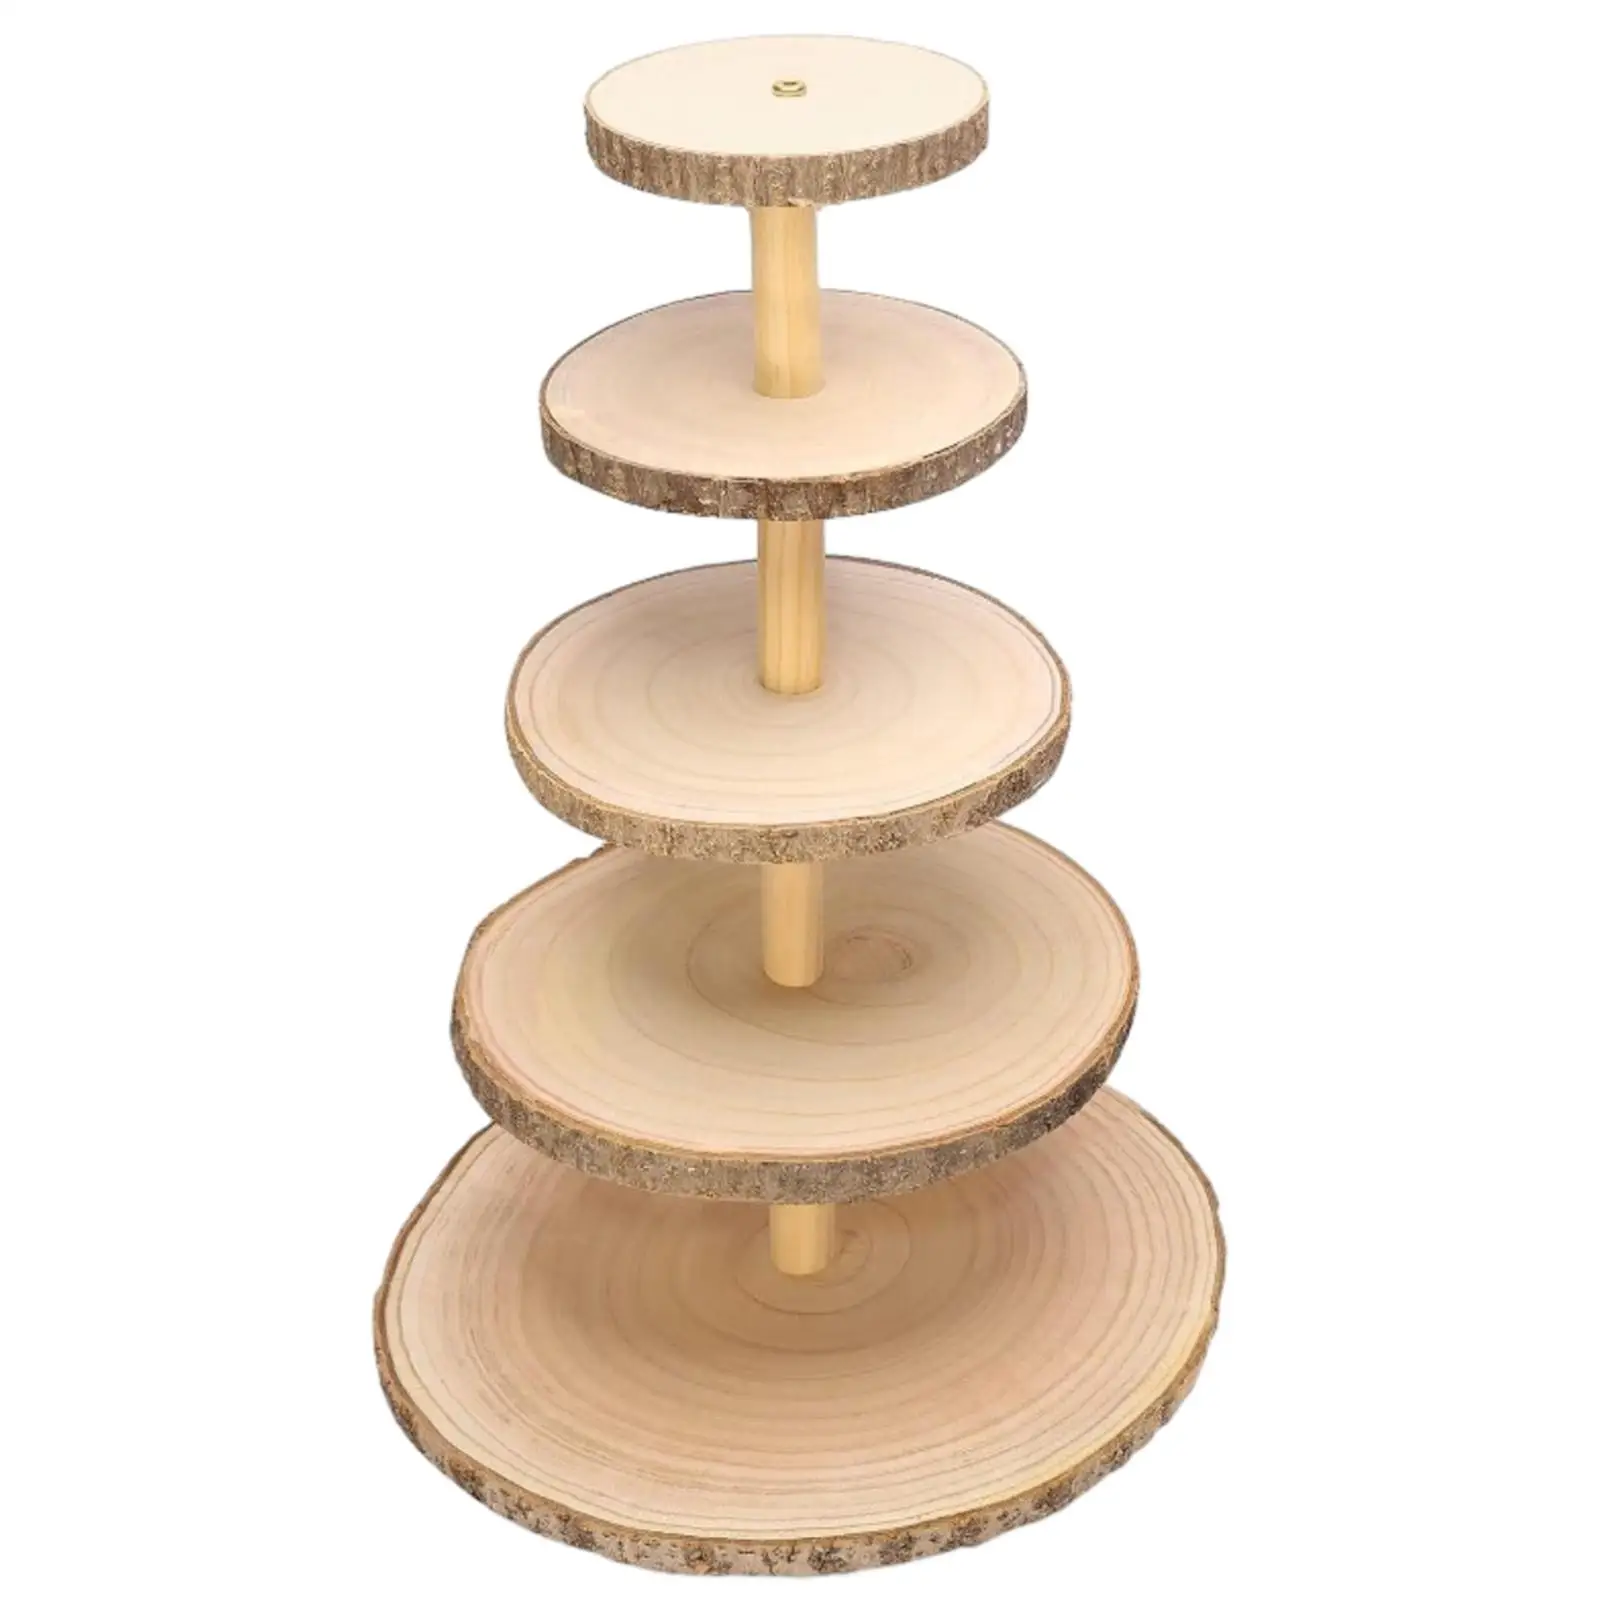 Wood Cupcake Stand Holder Detachable Wood Slices Round Cupcake Holder for Wedding Centerpiece Home Party Presenting Crafts